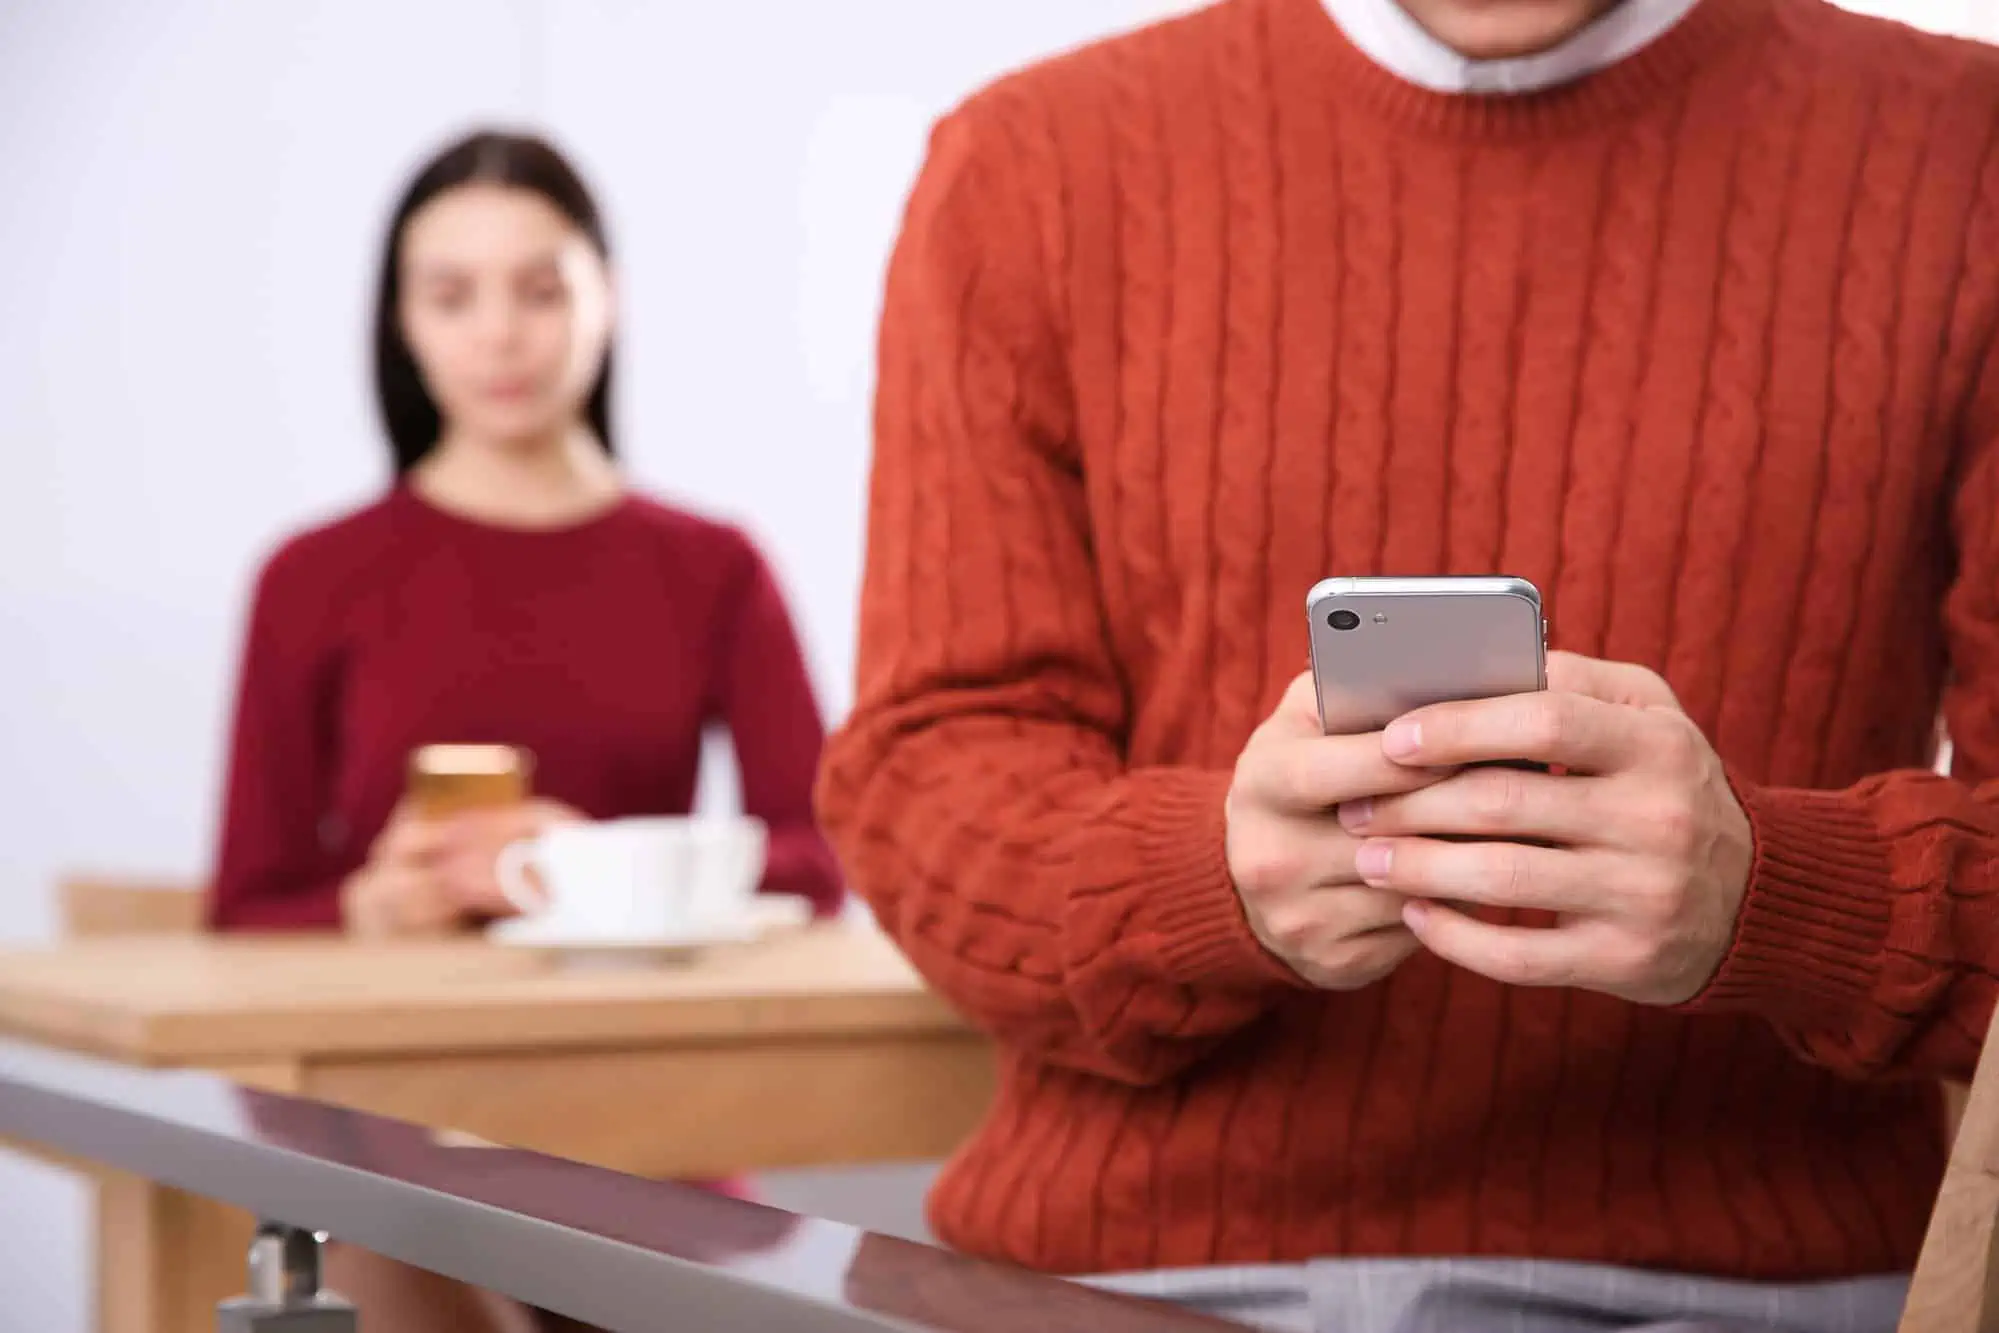 A man in a red sweater holding a cell phone